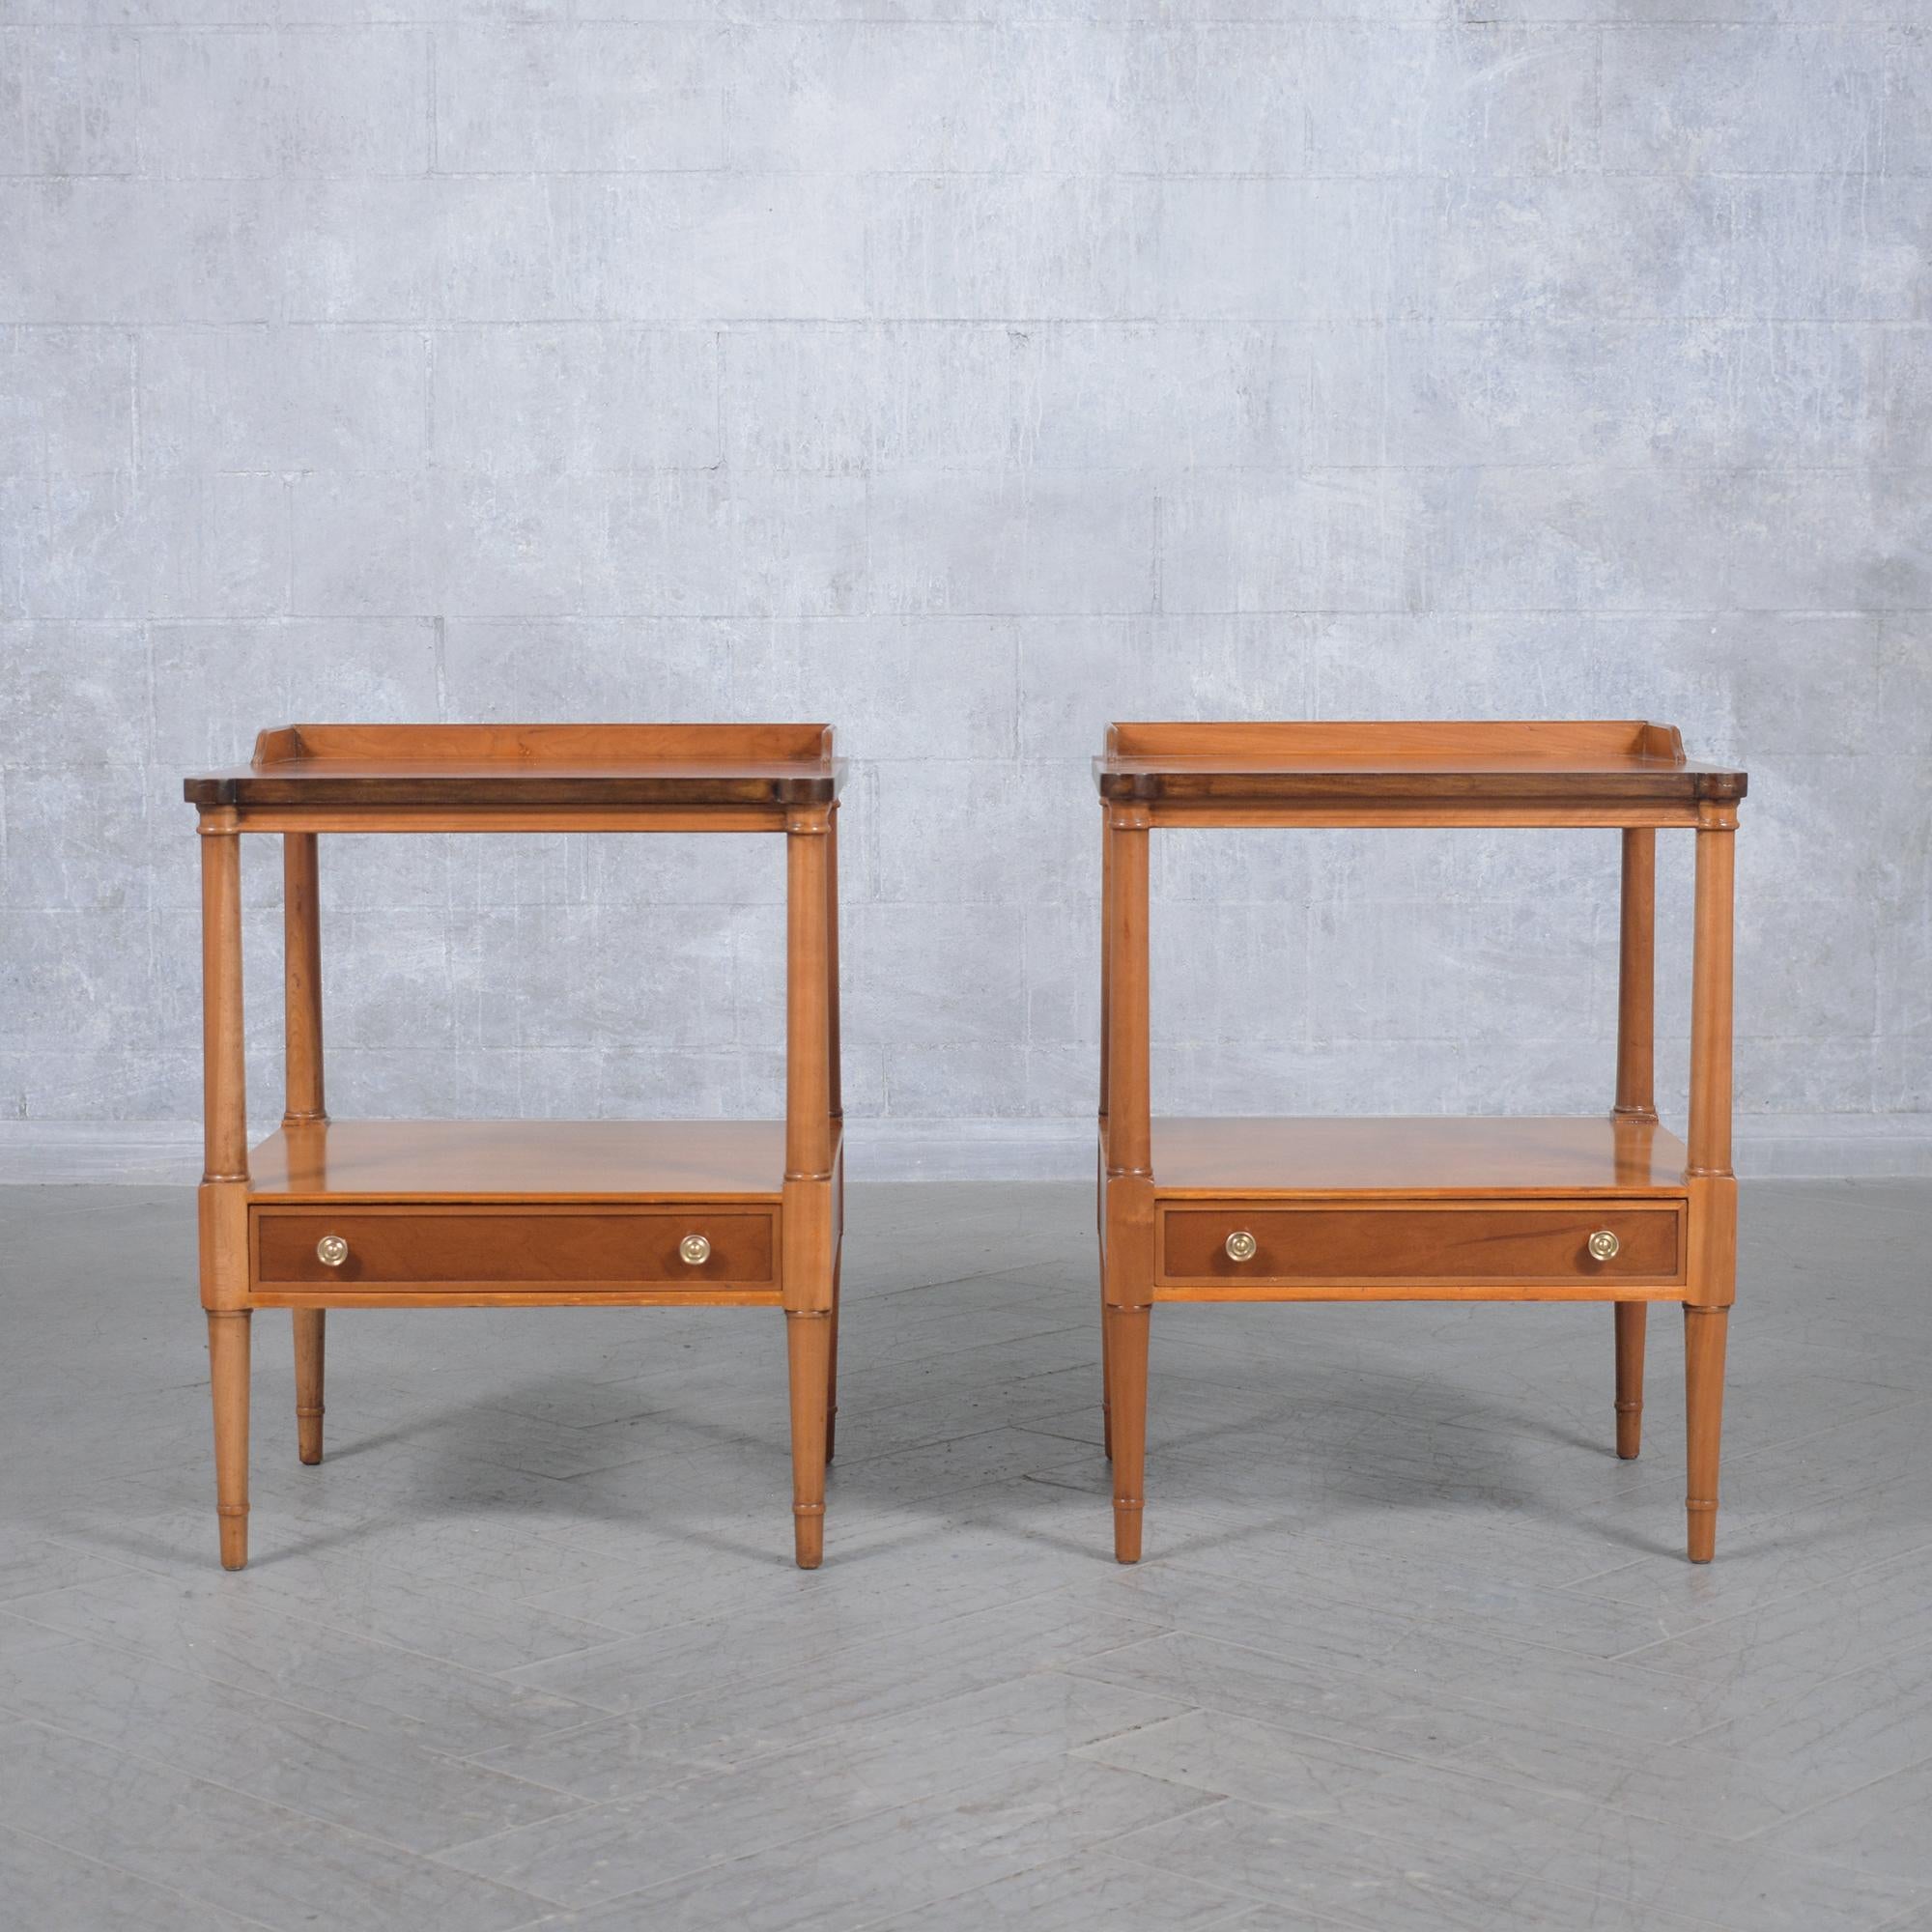 American Elegant Handcrafted Maple Bedside Tables with Brass Handles and Tapered Legs For Sale